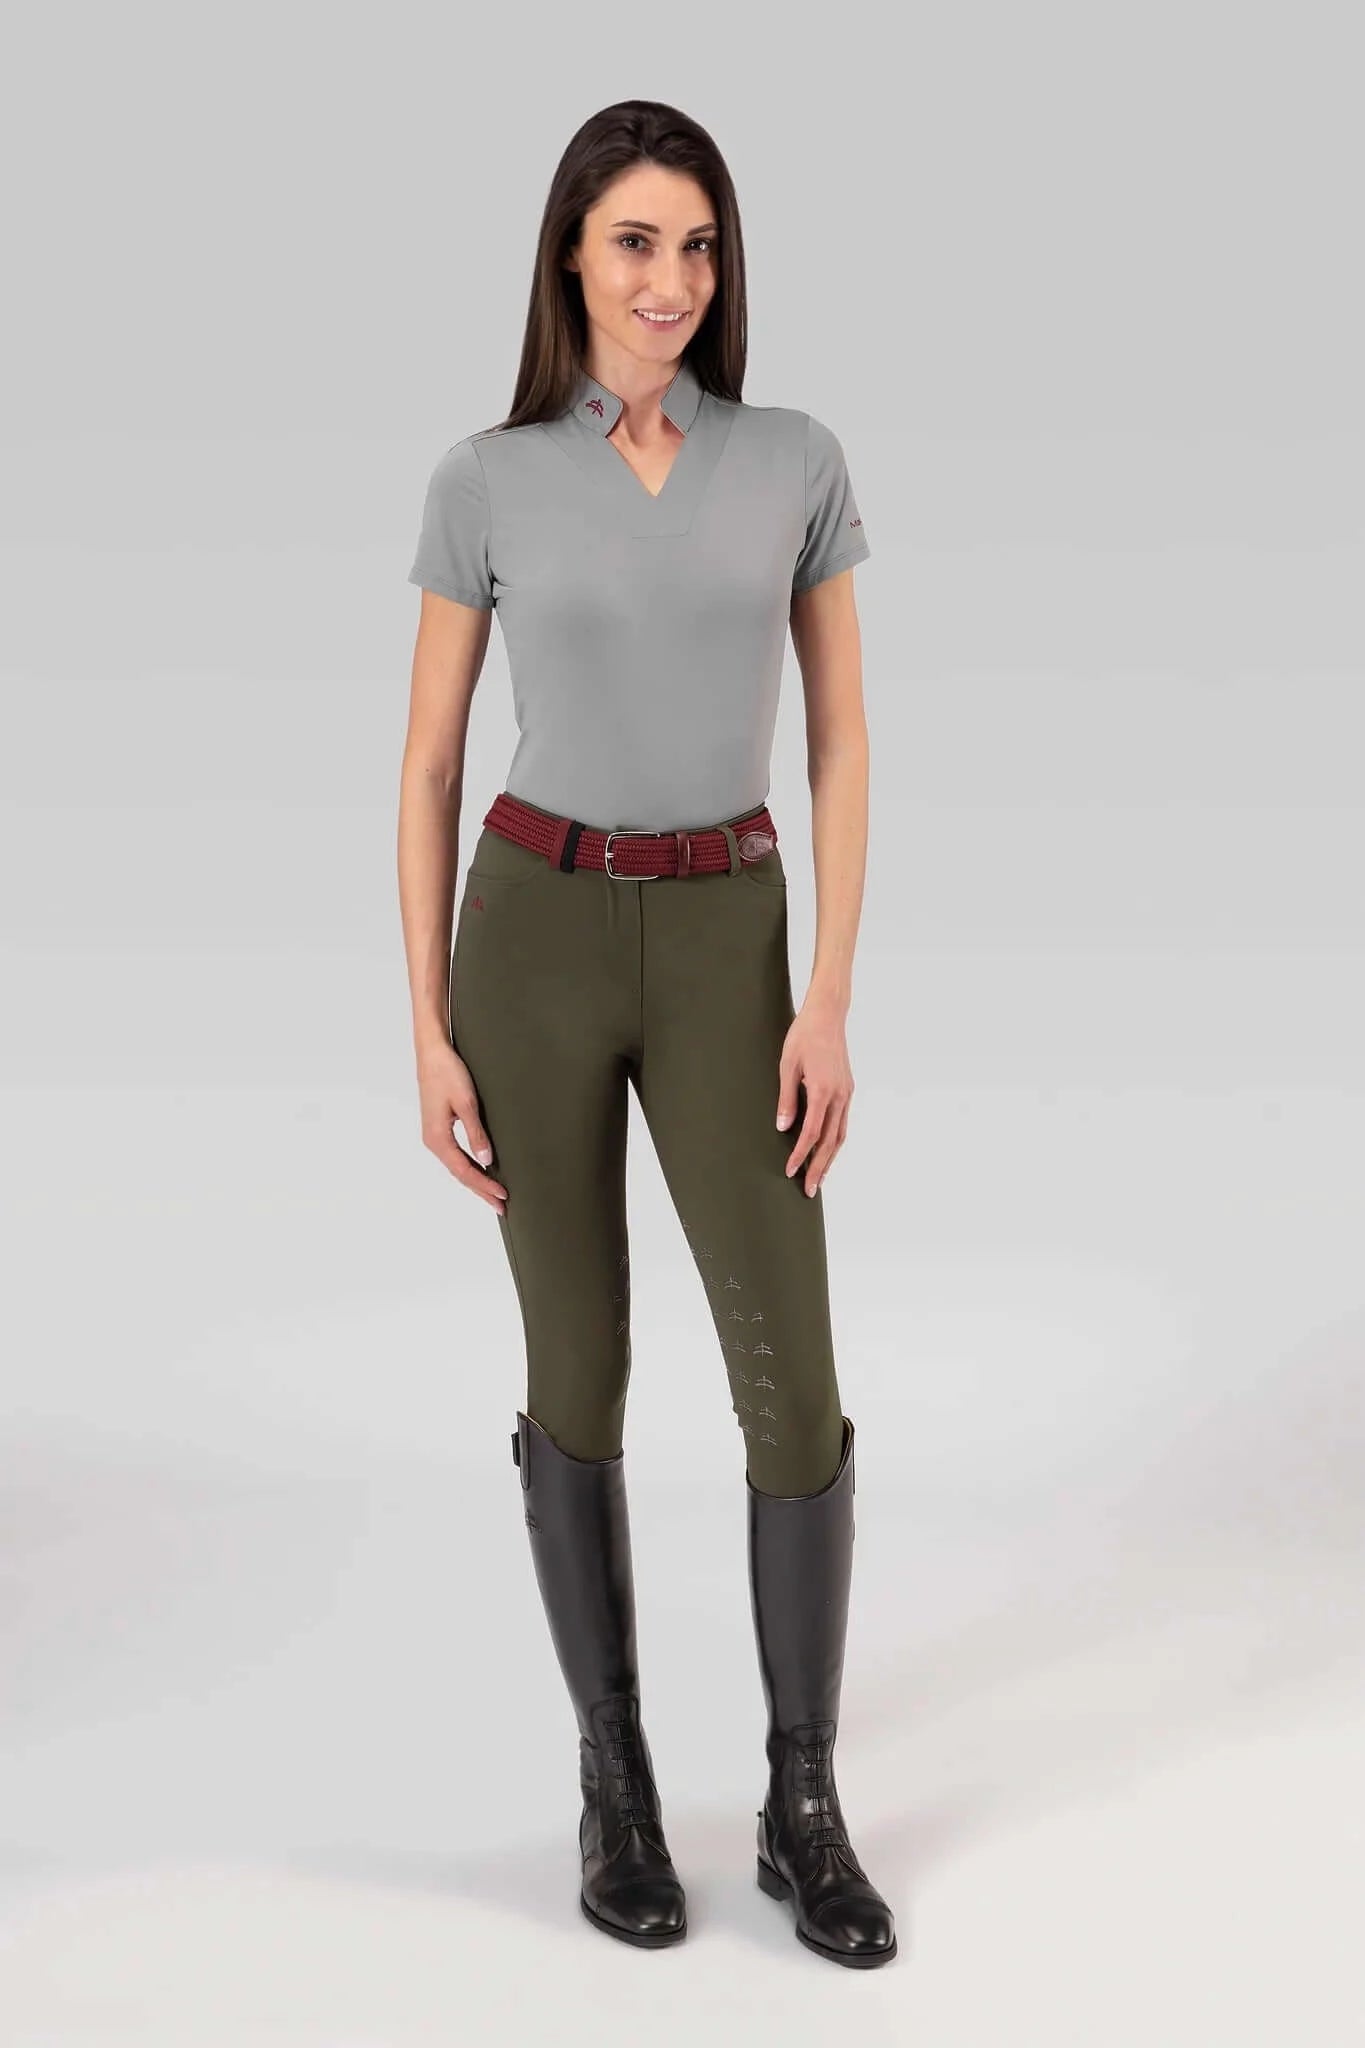 Jessica breeches with knee pads